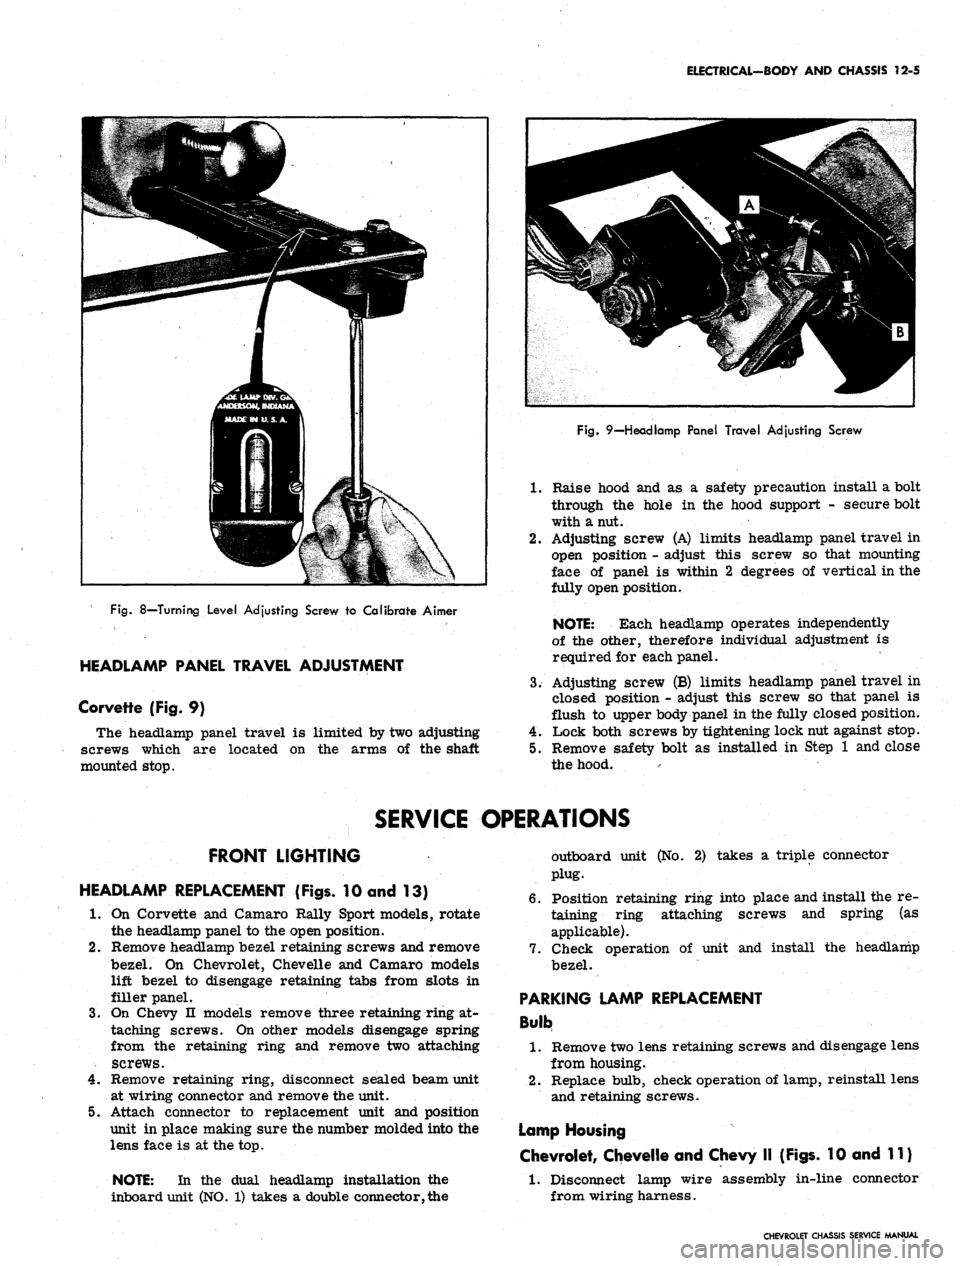 CHEVROLET CAMARO 1967 1.G Chassis Workshop Manual 
ELECTRICAL-BODY AND CHASSIS 12-5

Fig.
 8—Turning Level Adjusting Screw to Calibrate Aimer

HEADLAMP PANEL TRAVEL ADJUSTMENT

Corvette (Fig. 9)

The headlamp panel travel is limited by two adjustin